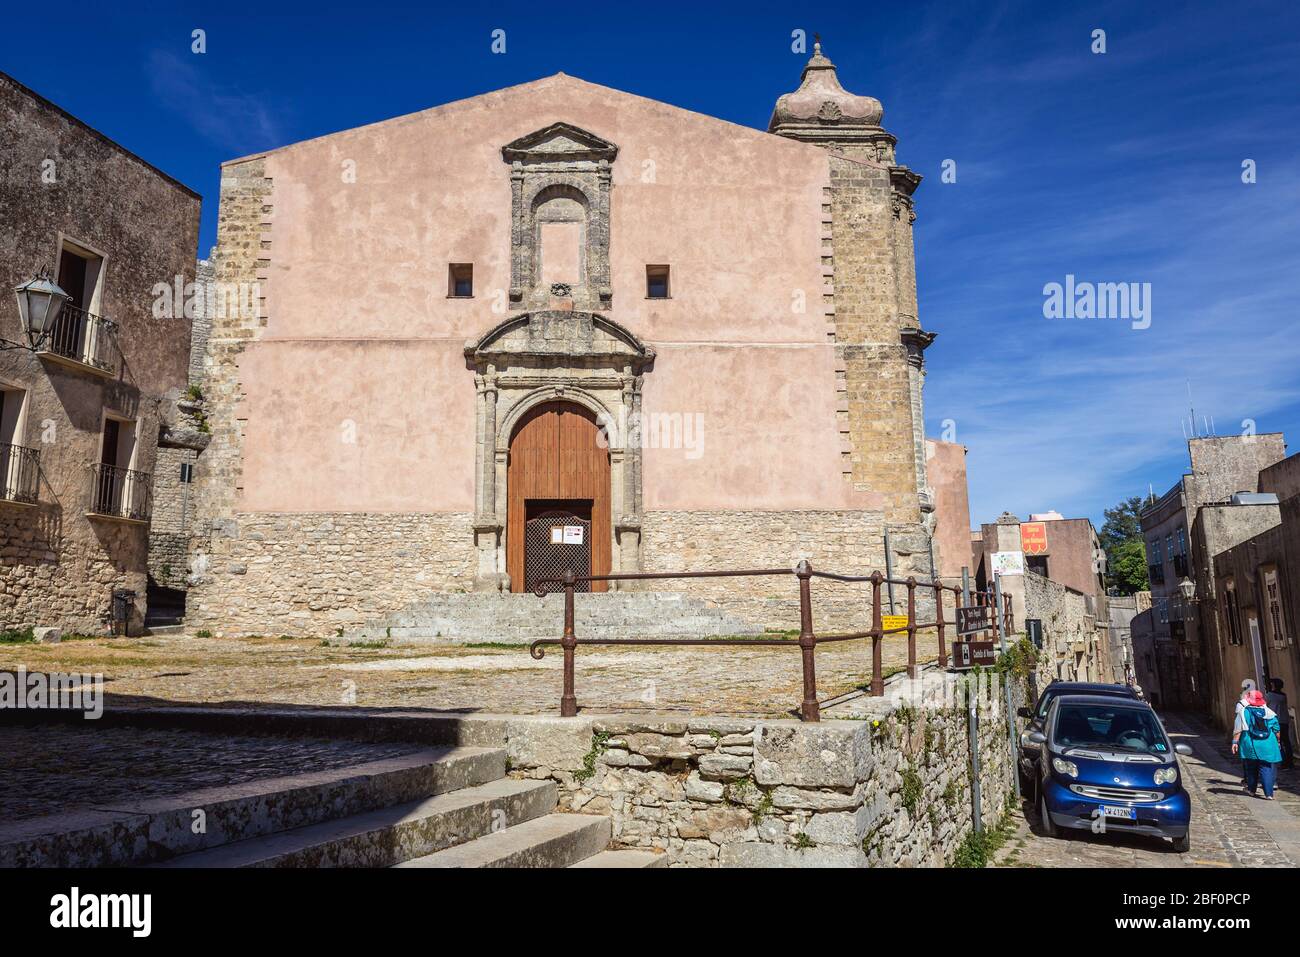 Church of Saint Julian in Erice historic town on a Mount Erice in the province of Trapani in Sicily, southern Italy Stock Photo